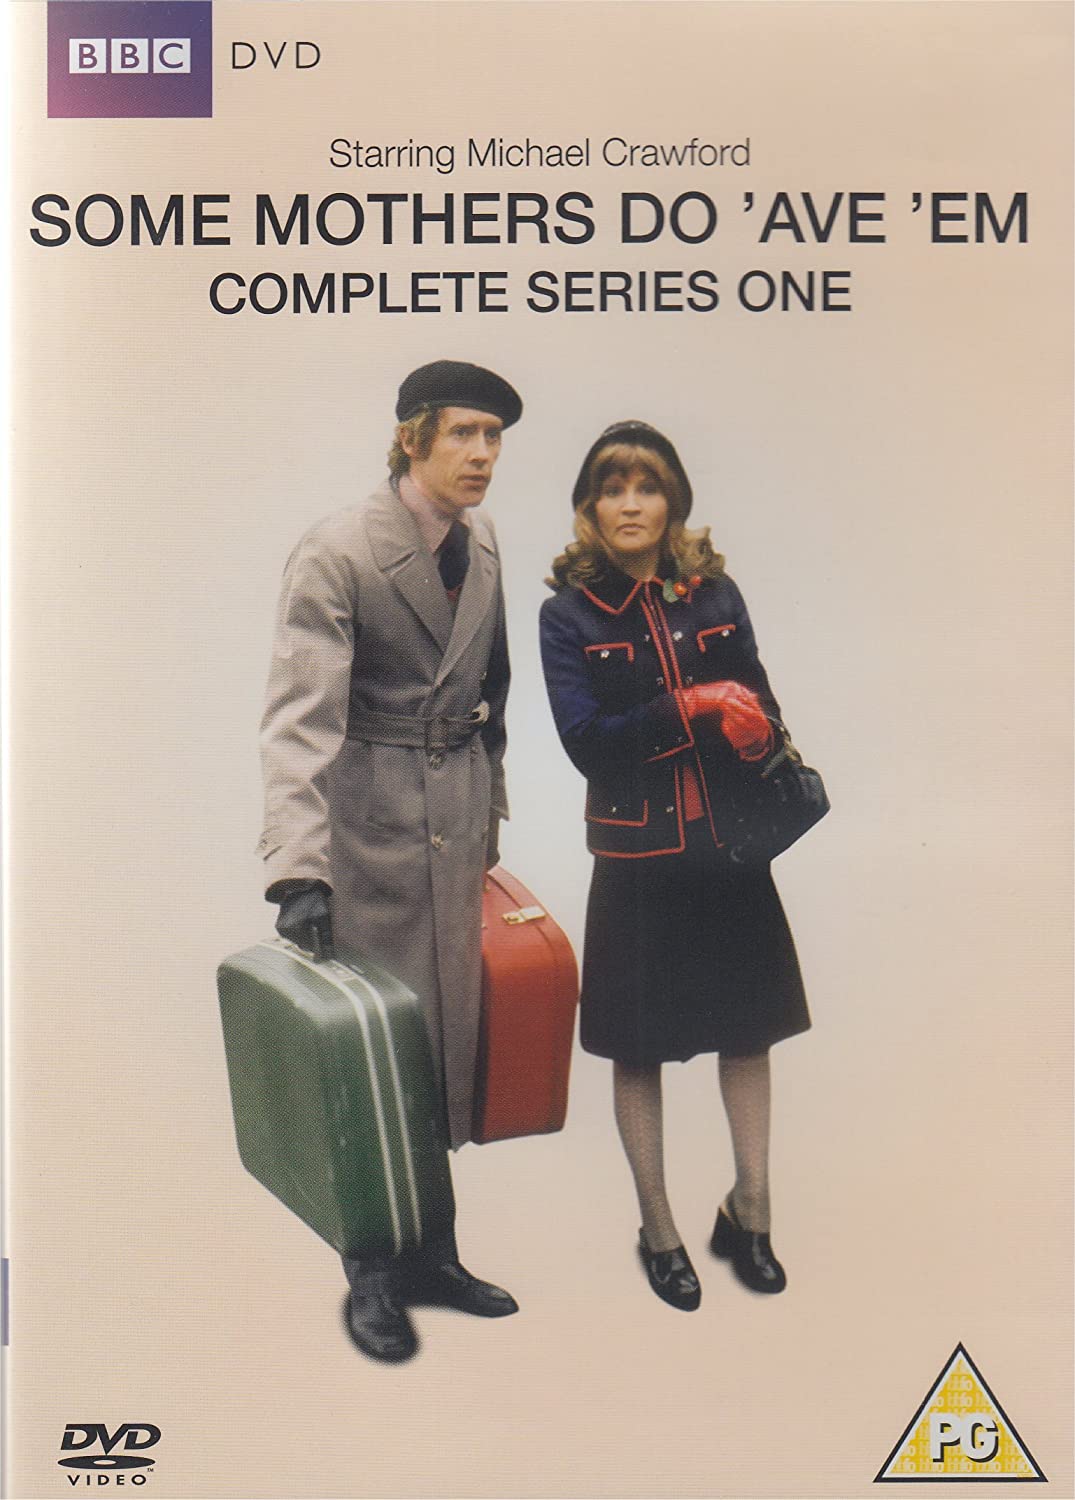 Some Mothers Do 'ave 'em - Complete Series 1 (BBC) [DVD]